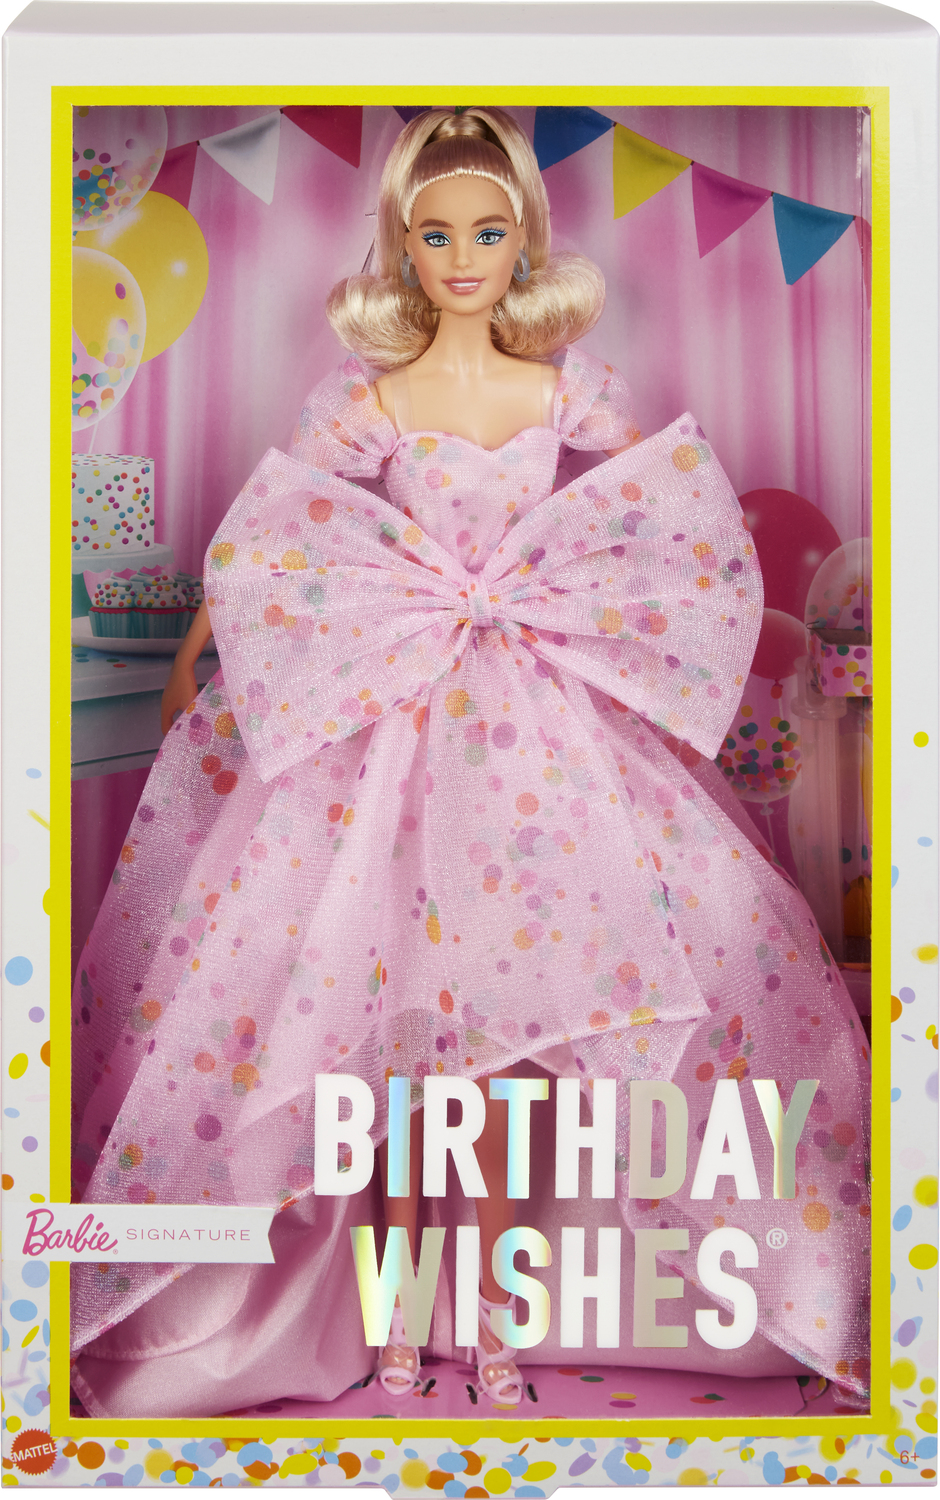 Barbie Birthday Wishes Doll - The Toy Box Hanover